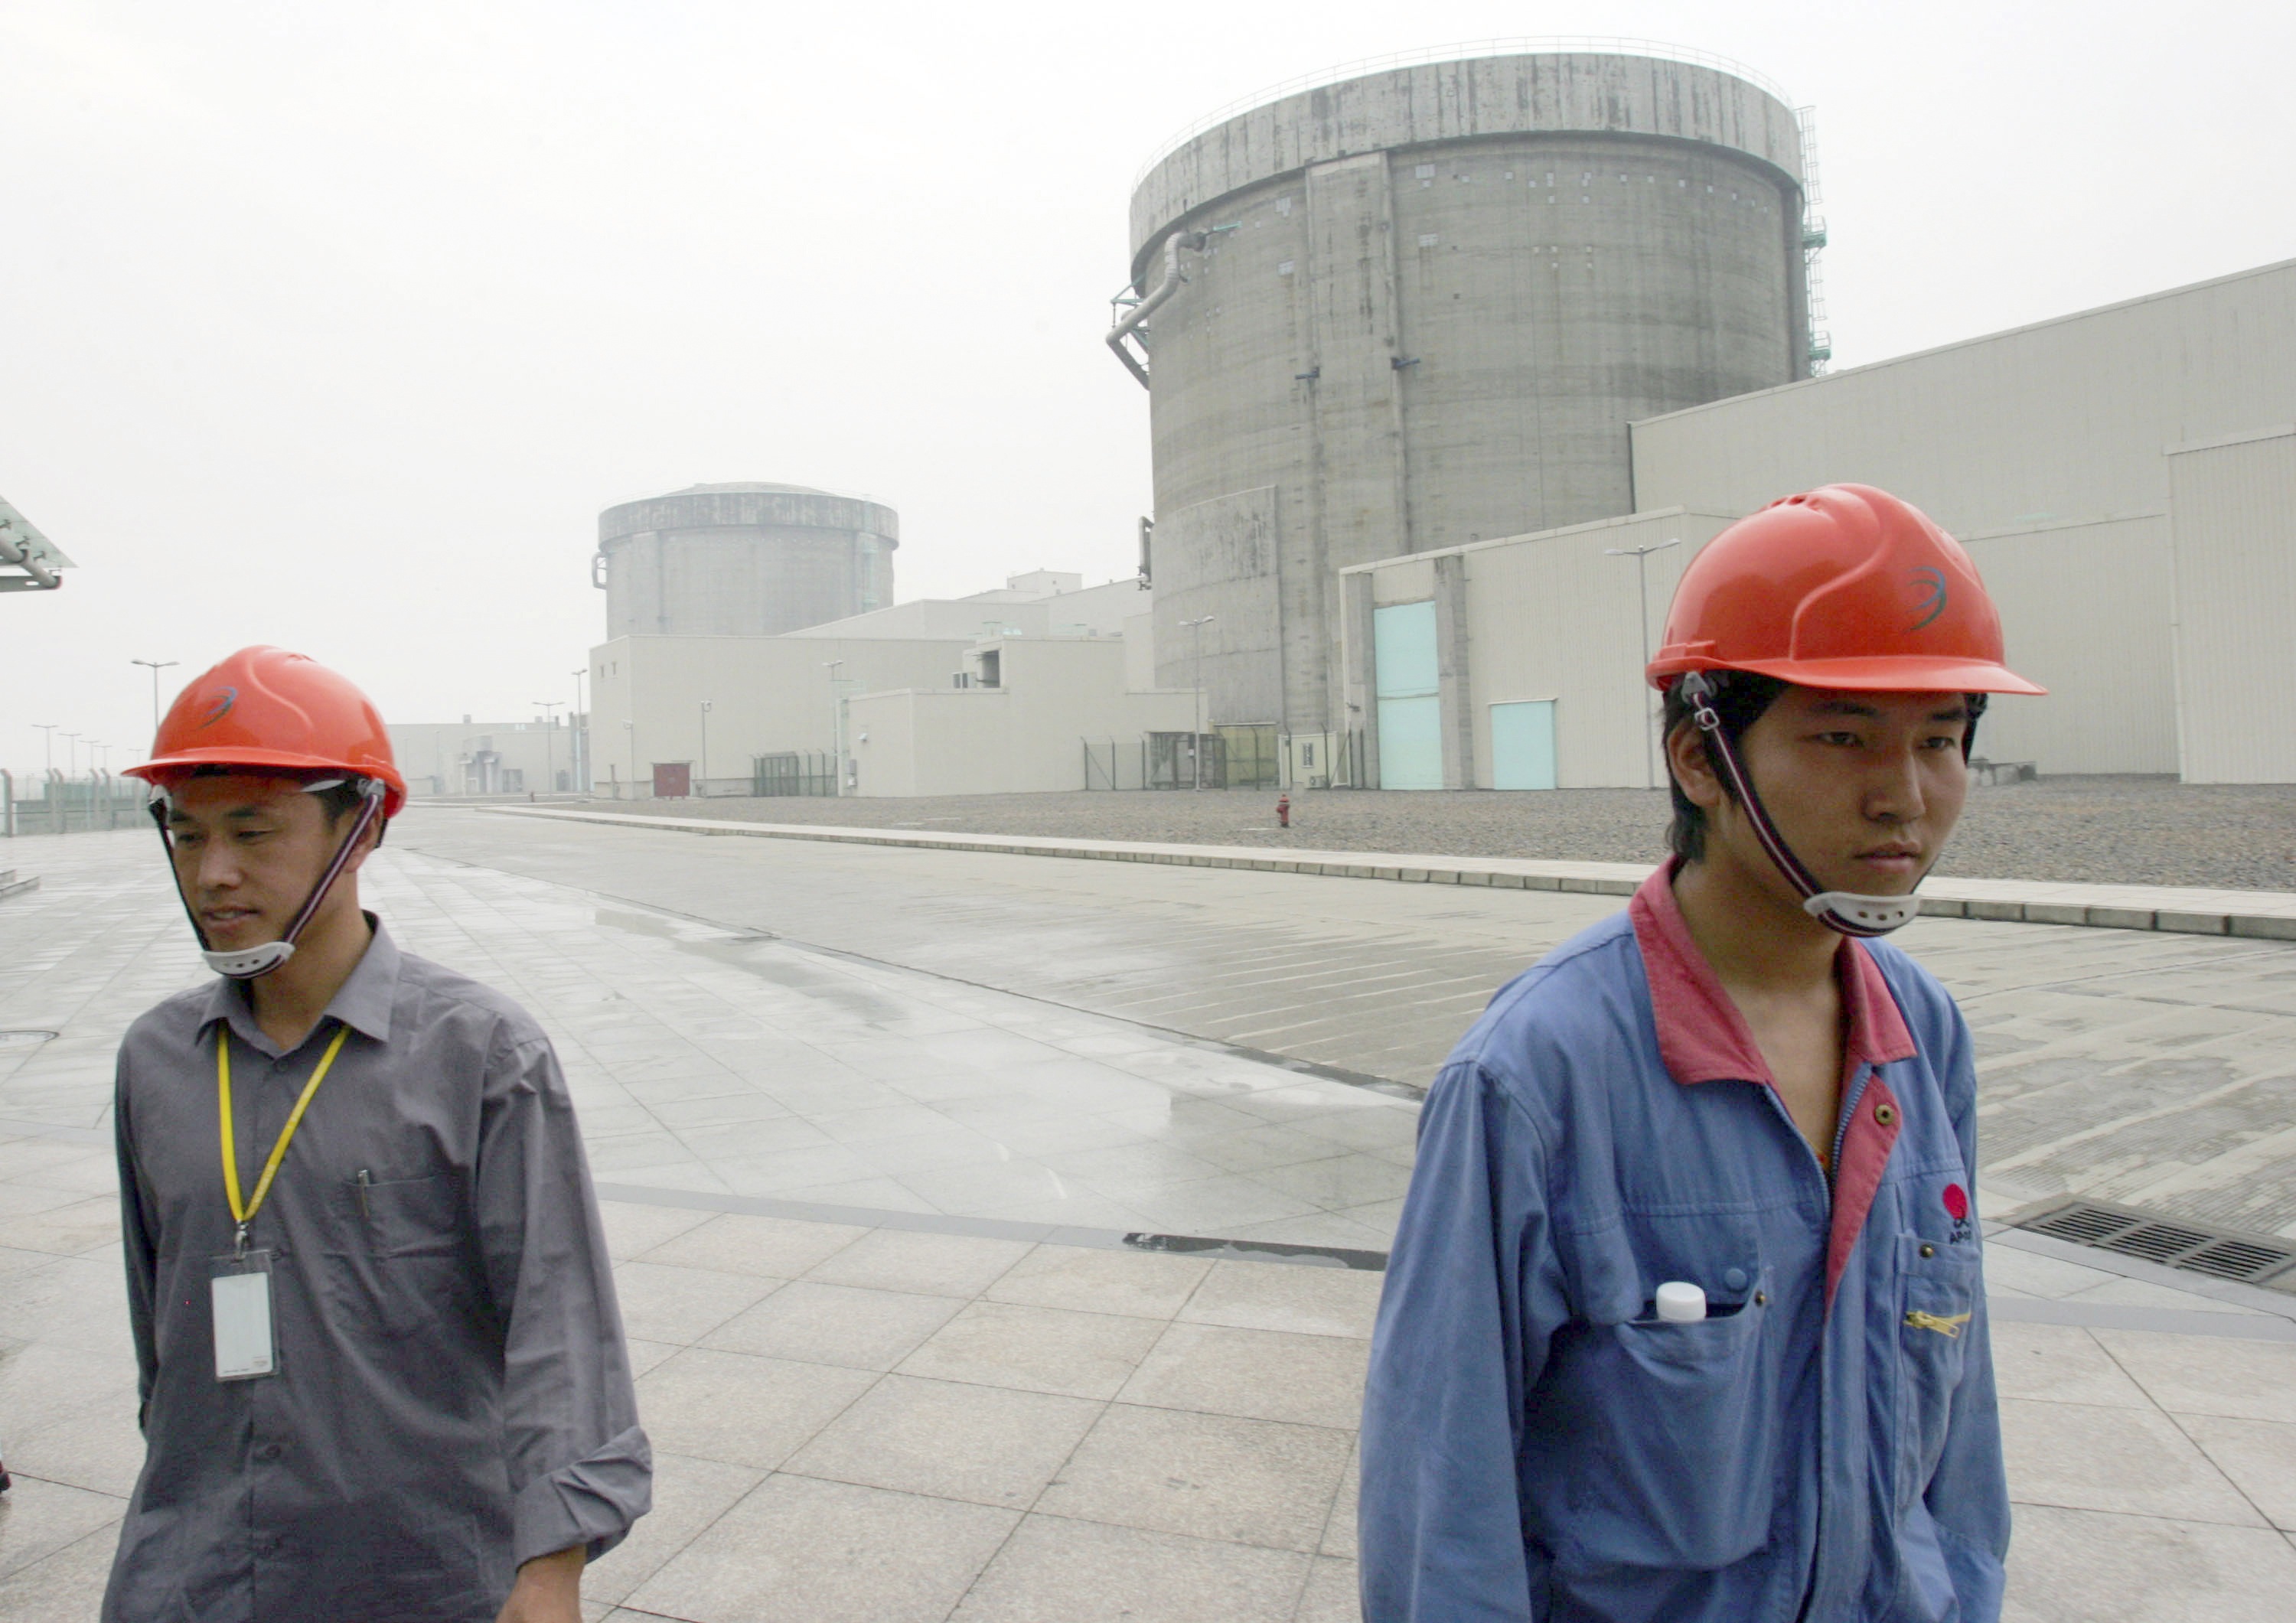 Chinese workers leave the nuclear power plant in Qinshan, in Zhejiang province, which will be inspected as part of nationwide safety checks. Photo Reuters